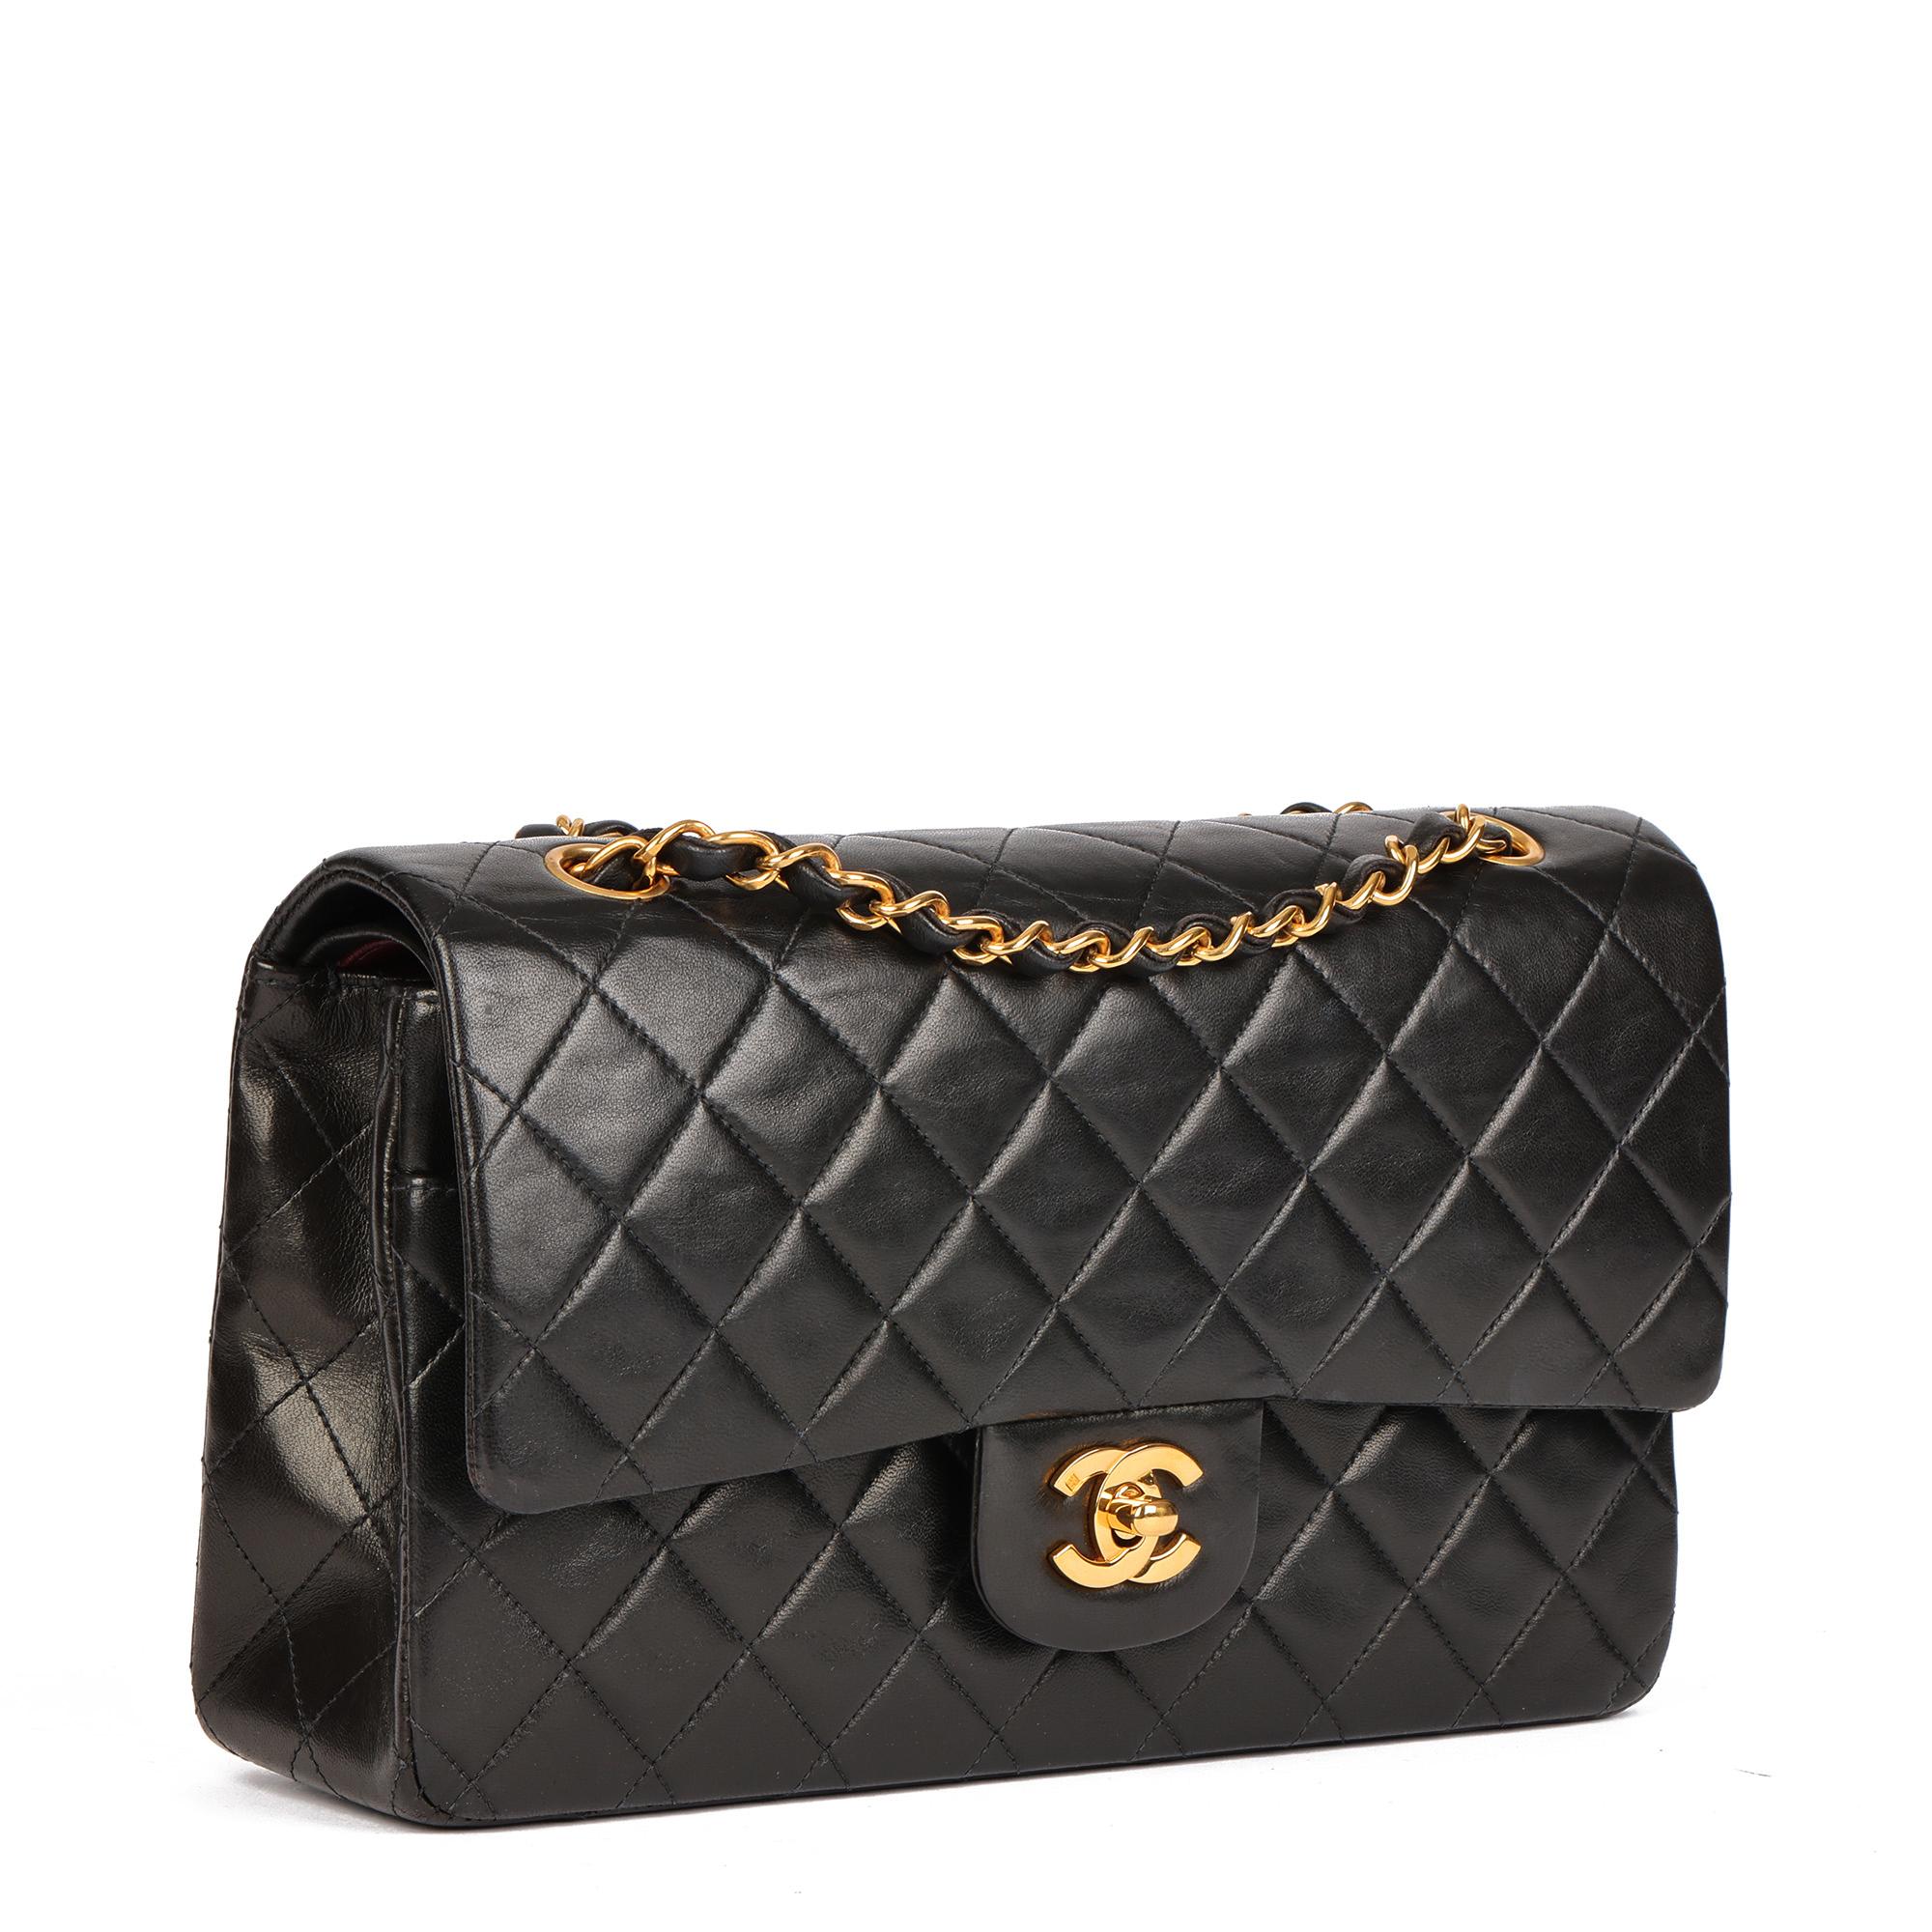 CHANEL
Black Quilted Lambskin Vintage Medium Classic Double Flap Bag 

Xupes Reference: HB4601
Serial Number: 3941336
Age (Circa): 1996
Authenticity Details: Serial Sticker (Made in France)
Gender: Ladies
Type: Shoulder

Colour: Black
Hardware: Gold